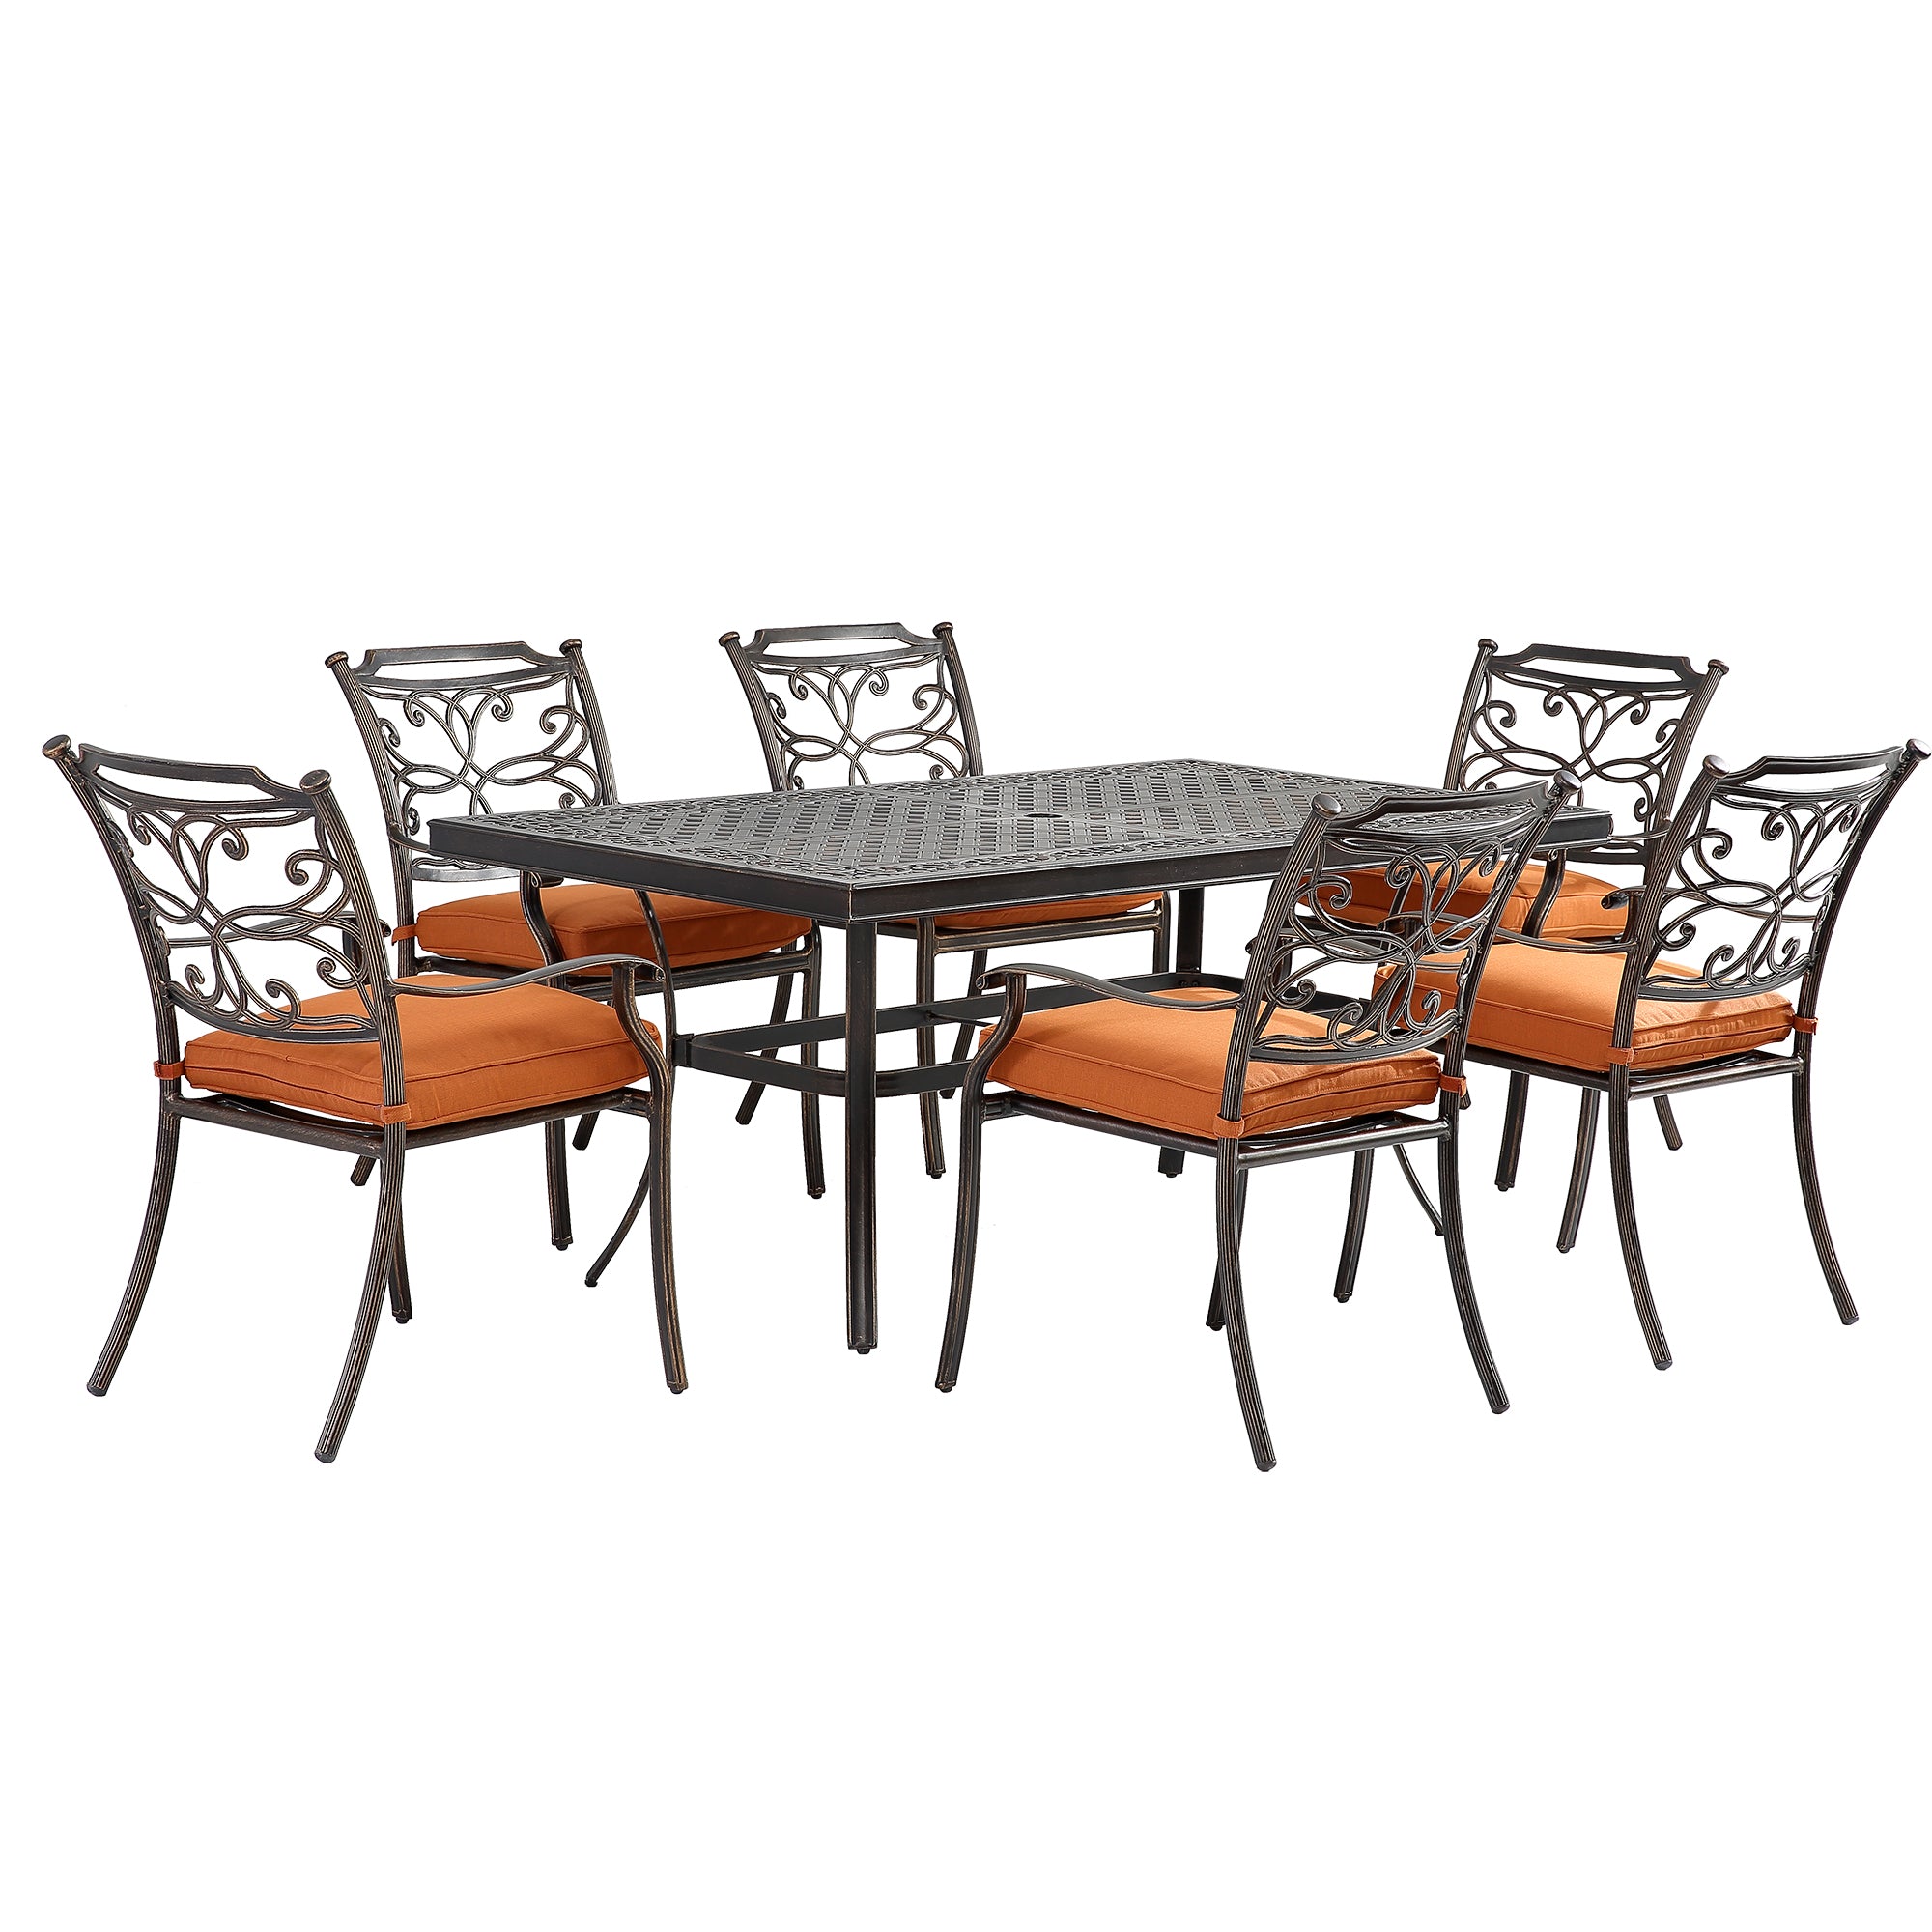 7-piece cast aluminum dining table set with rectangular rounded corner table and diagonal Flower-Shaped dining chairs